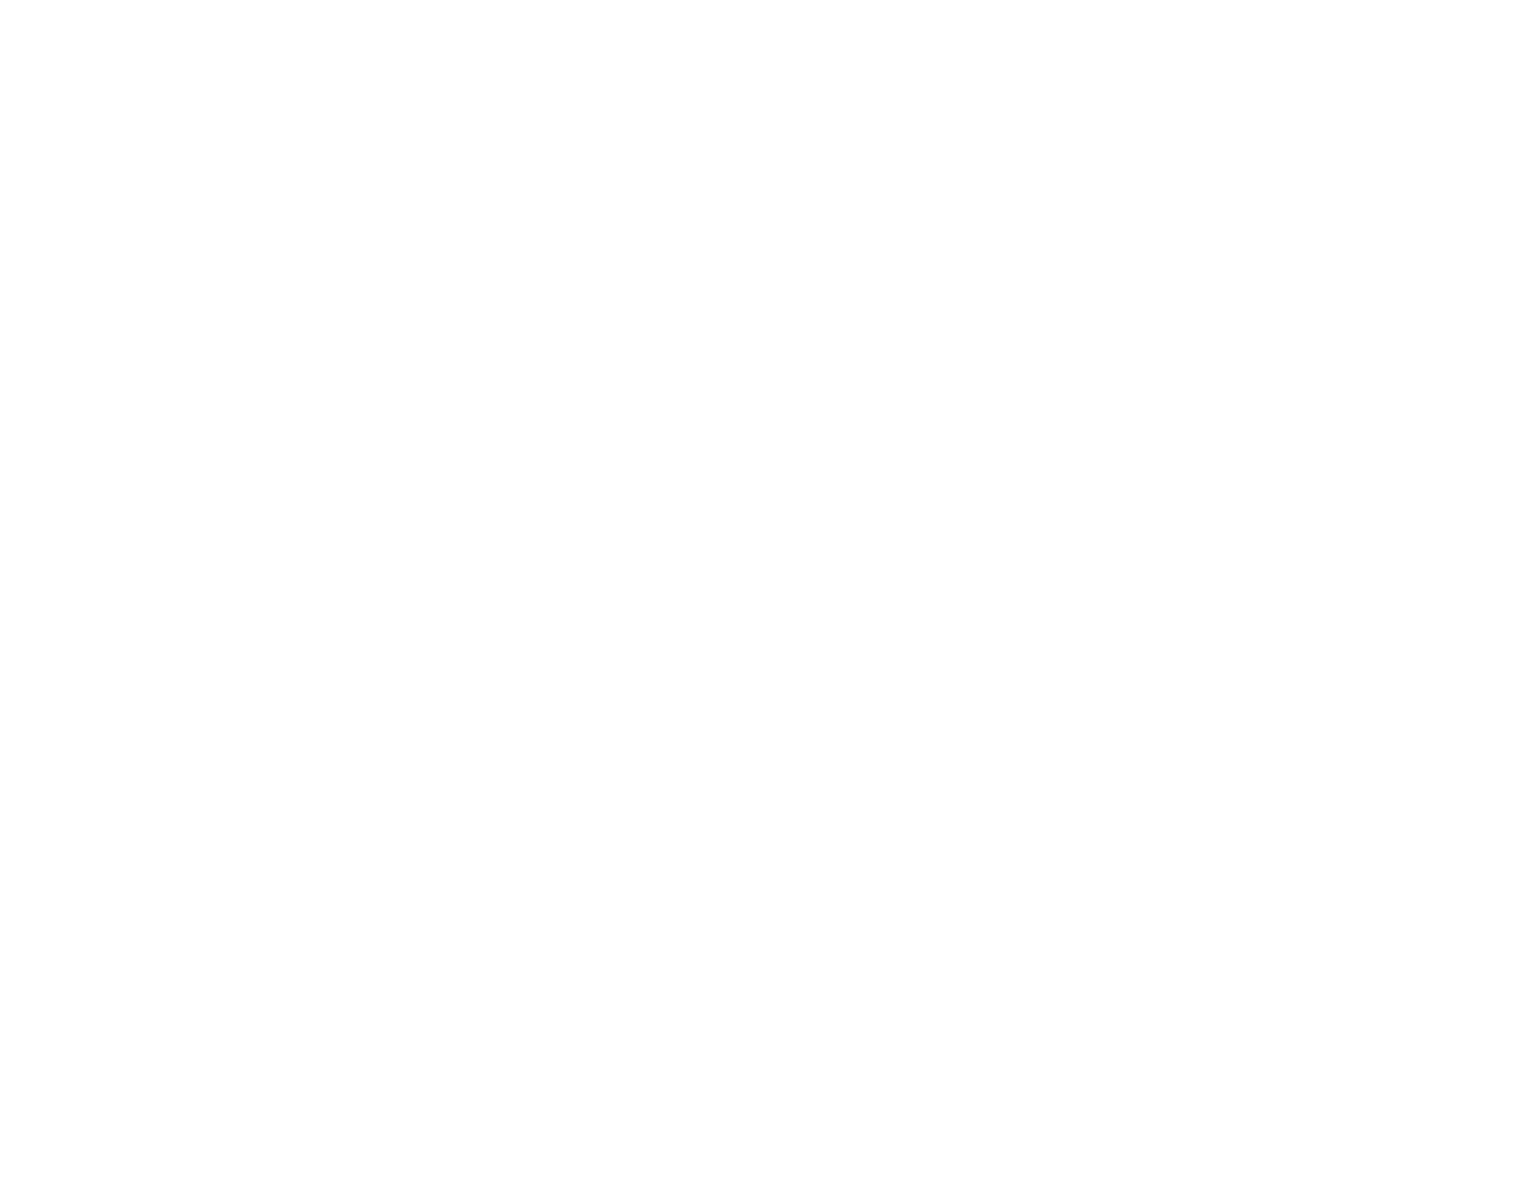 PUMA logo in transparent PNG and vectorized SVG formats